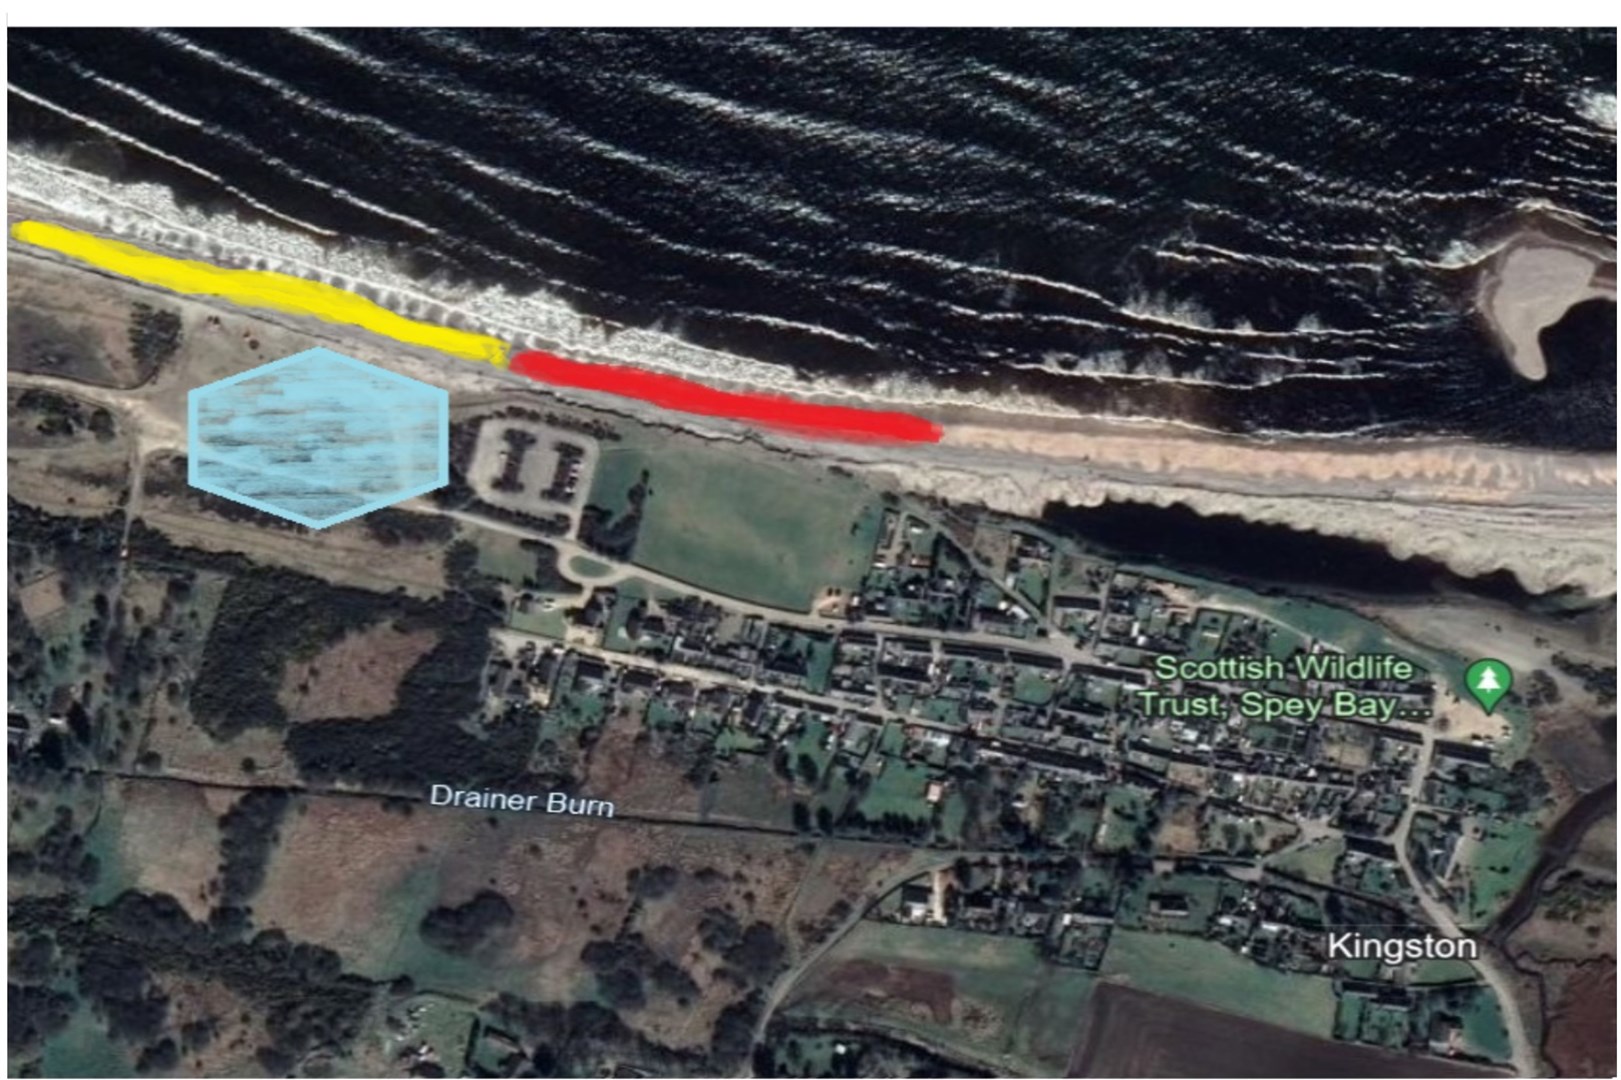 The new lagoon is shown in blue, while the proposed council barrier is marked in red. The yellow line indicates what's been argued for by Mr Mackie.